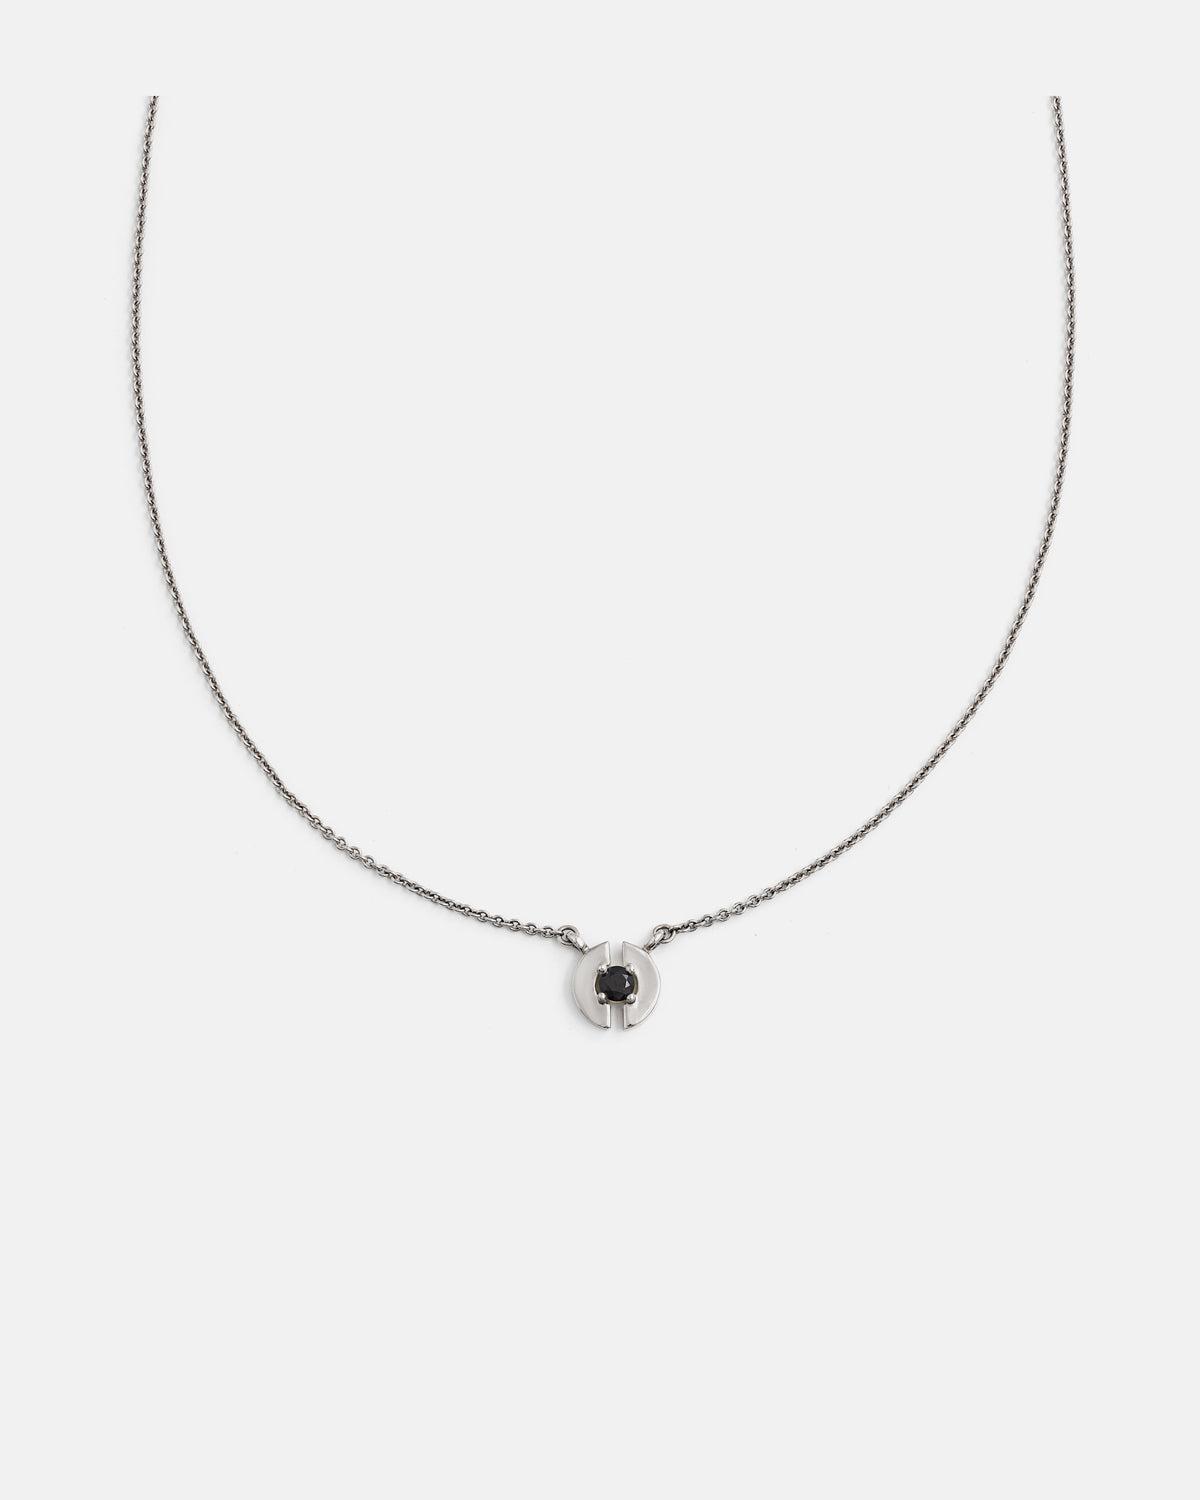 Stein Necklace in Silver with Black Spinel